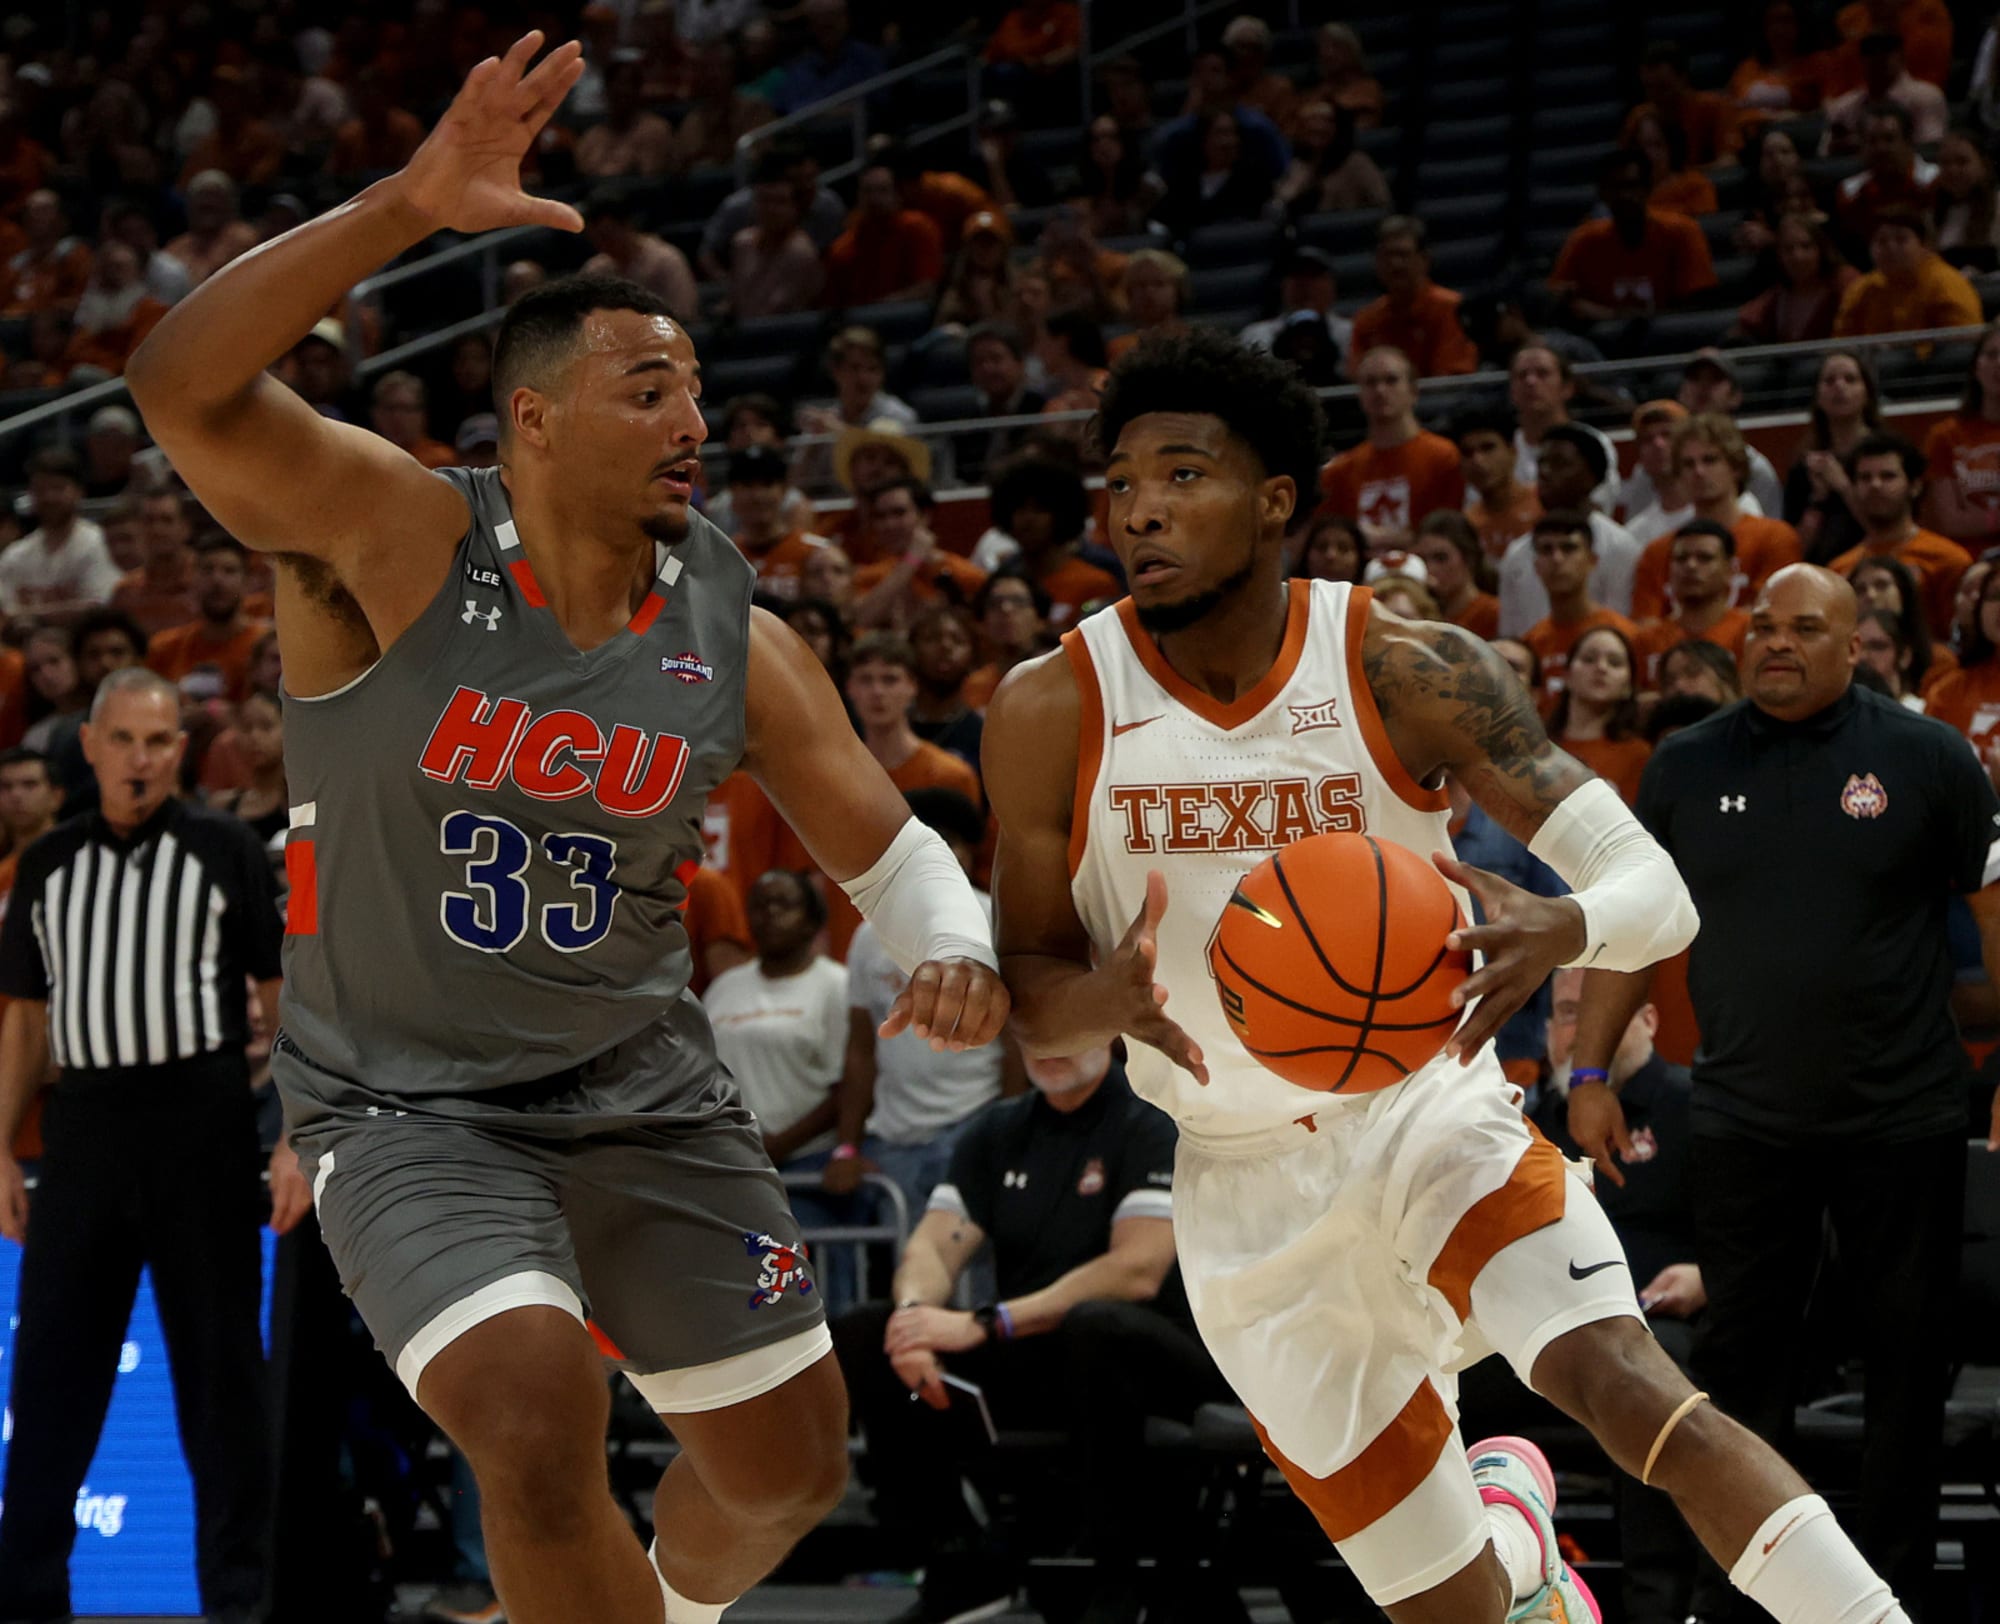   
																Texas Basketball: 2 studs, 1 dud from first week of the season 
															 